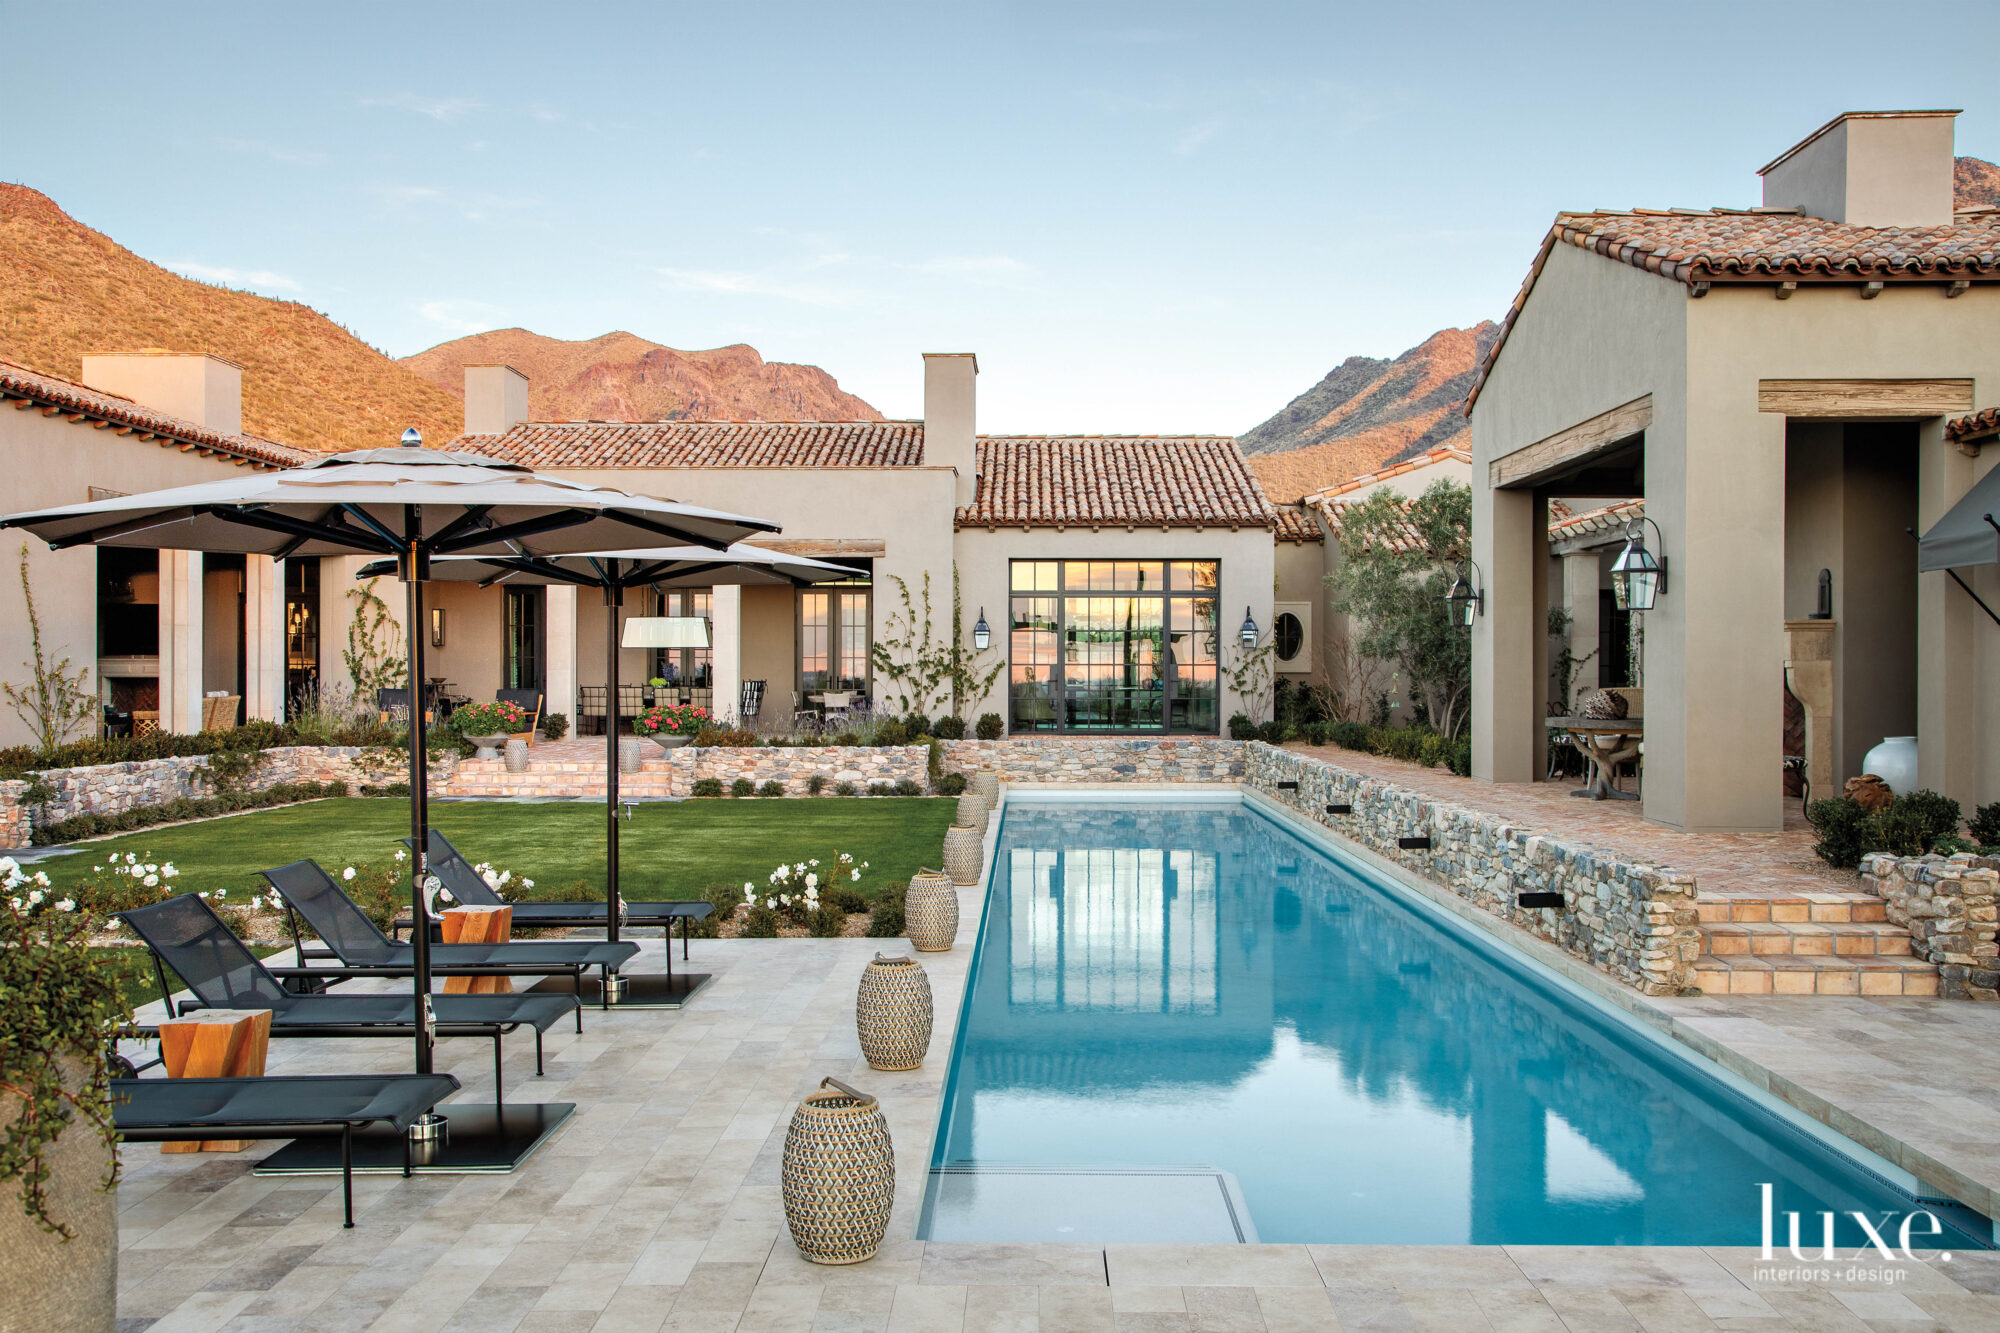 Mountains and the Mediterranean architecture serve as the poolside view